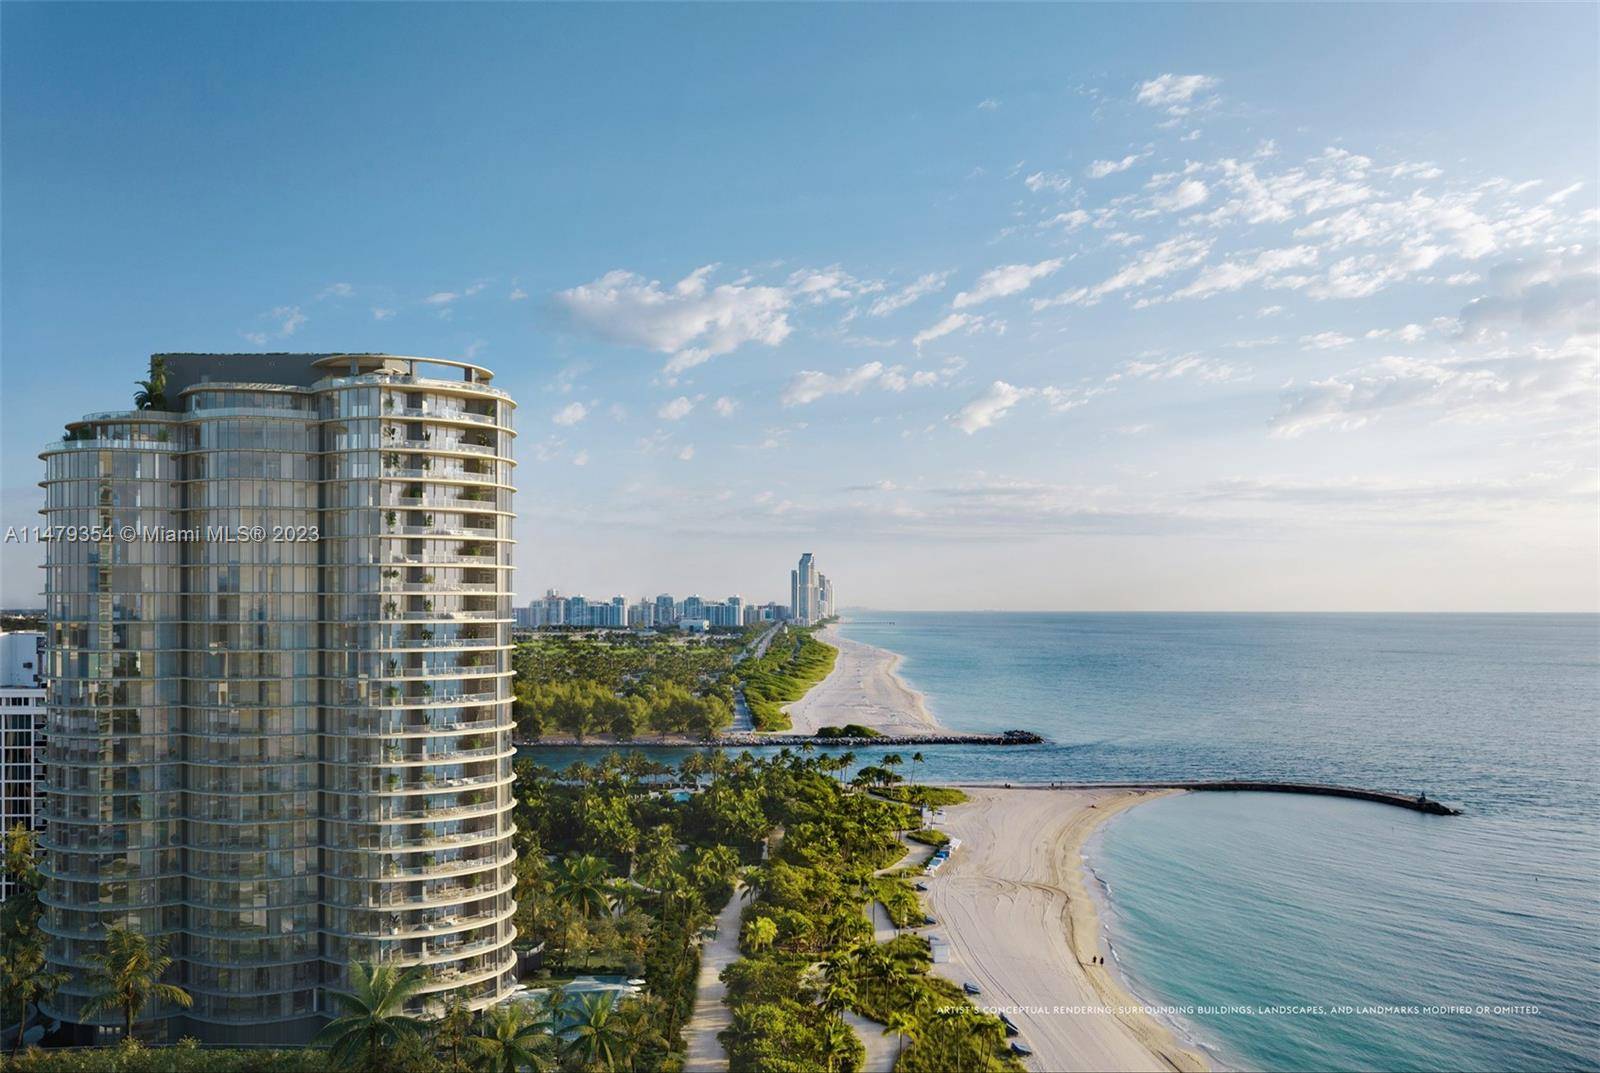 Designed by renowned architecture firm, Rivage Bal Harbour is perfectly positioned on the most beautiful stretch of sand in the country.